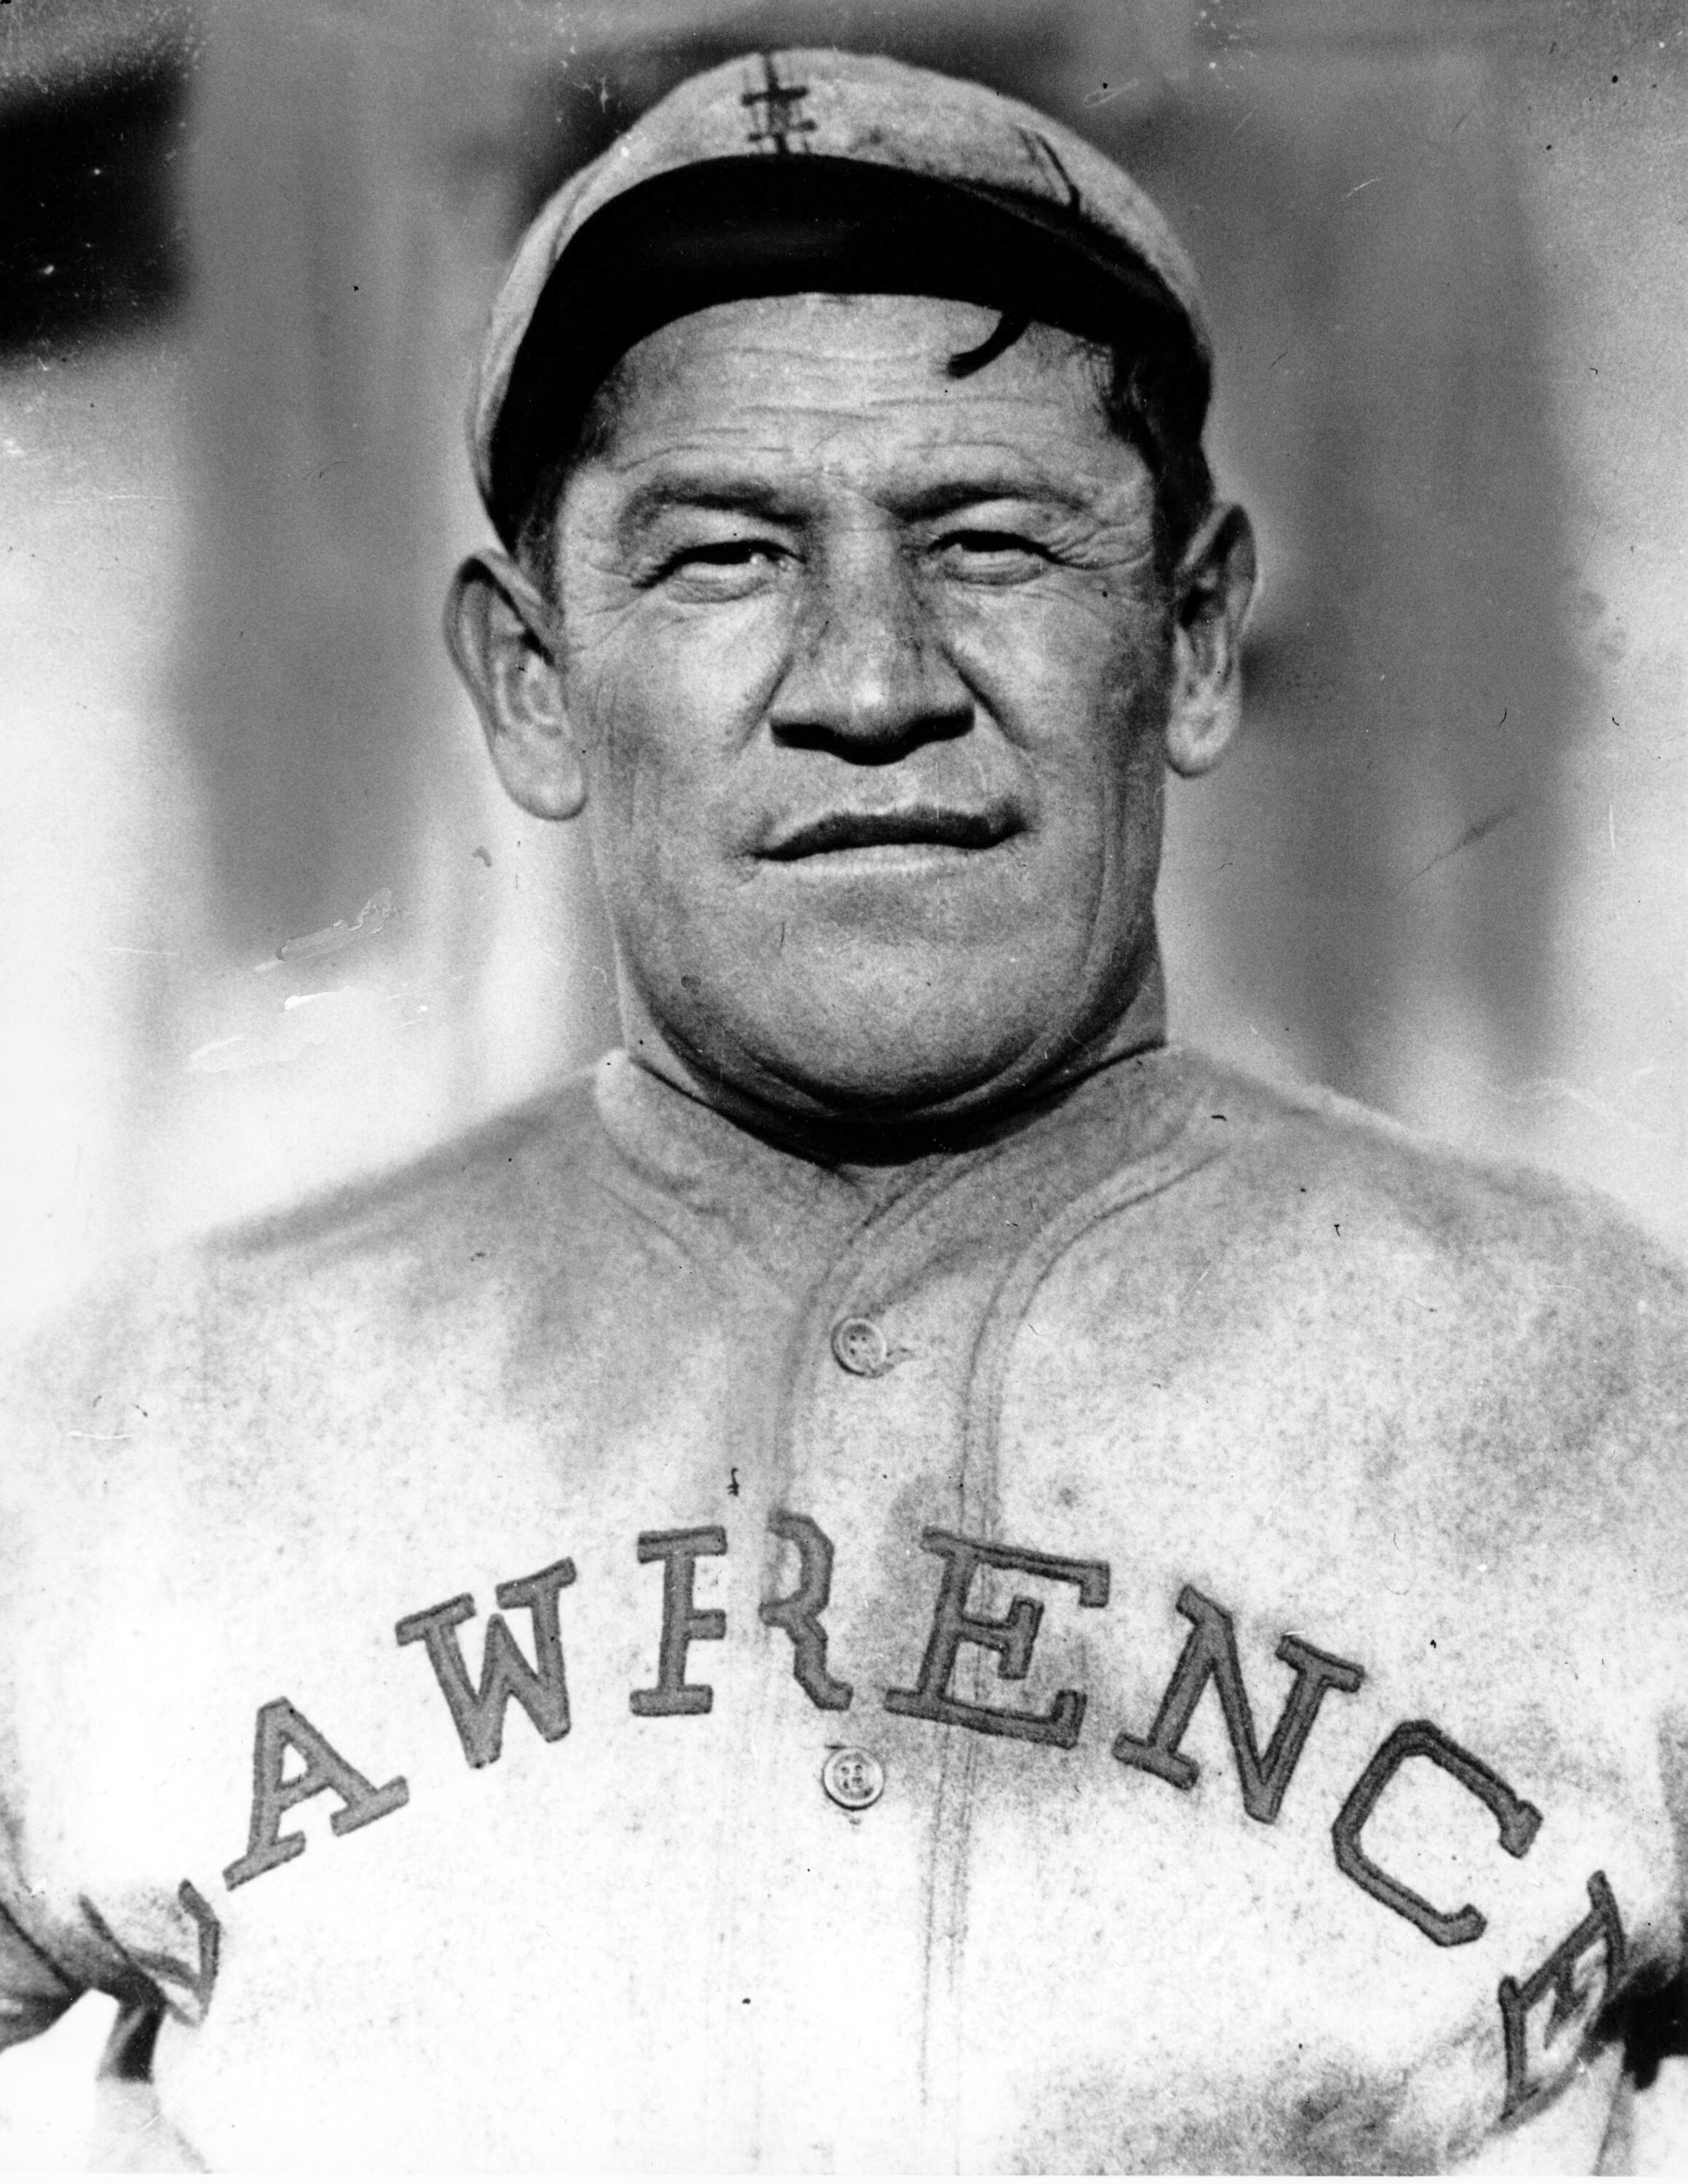 Jim Thorpe reinstated as sole winner for 1912 Olympic golds